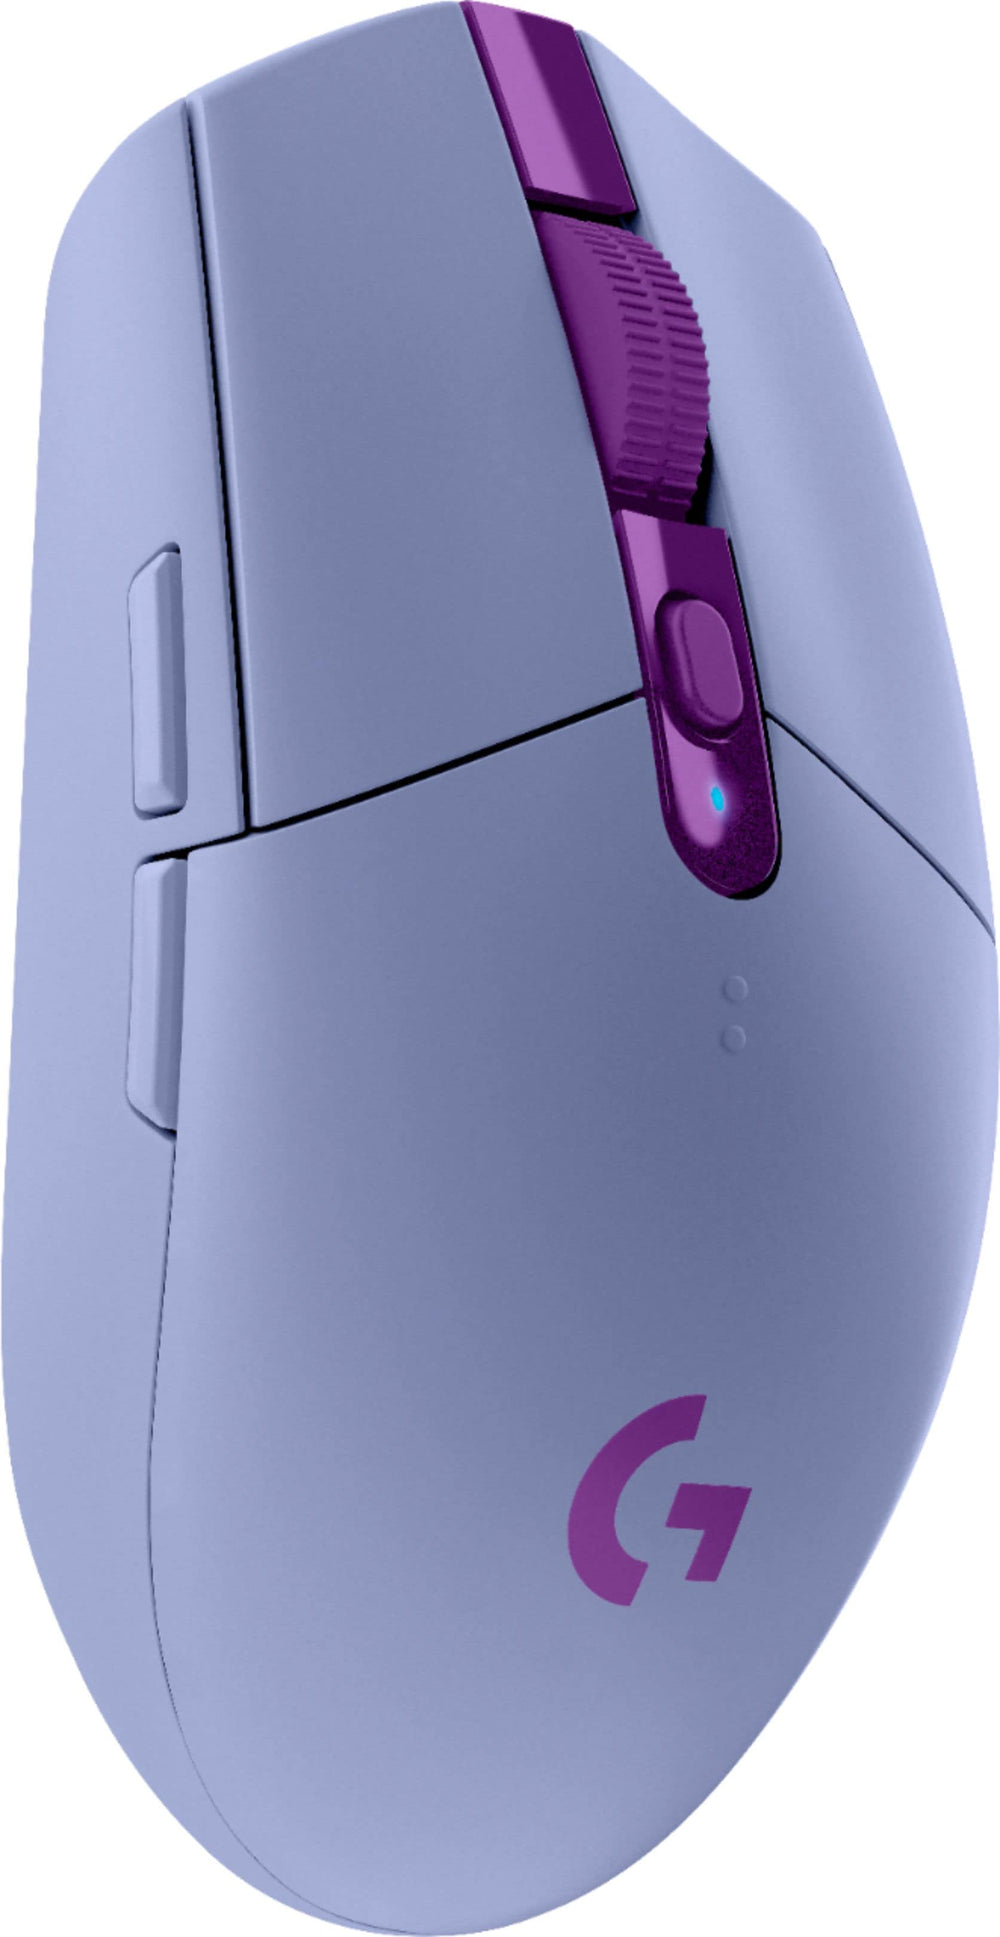 Logitech - G305 LIGHTSPEED Wireless Optical 6 Programmable Button Gaming Mouse with 12,000 DPI HERO Sensor - Lilac_1